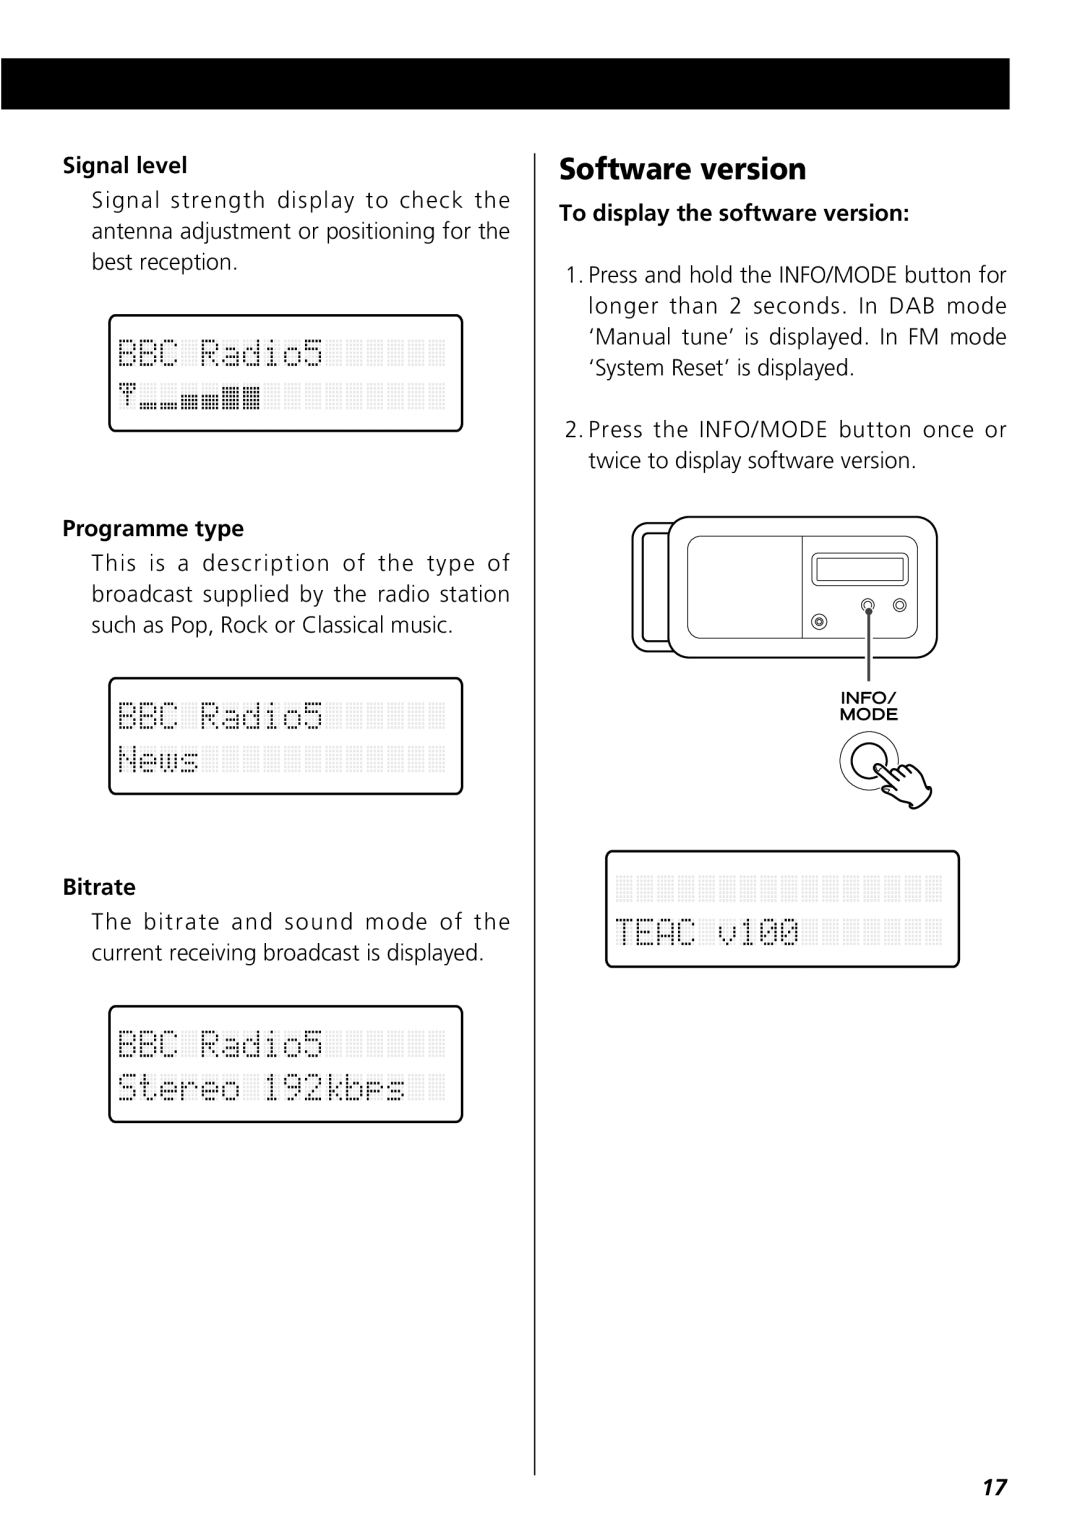 Teac R-3 owner manual Software version, Signal level, Programme type, Bitrate, To display the software version 